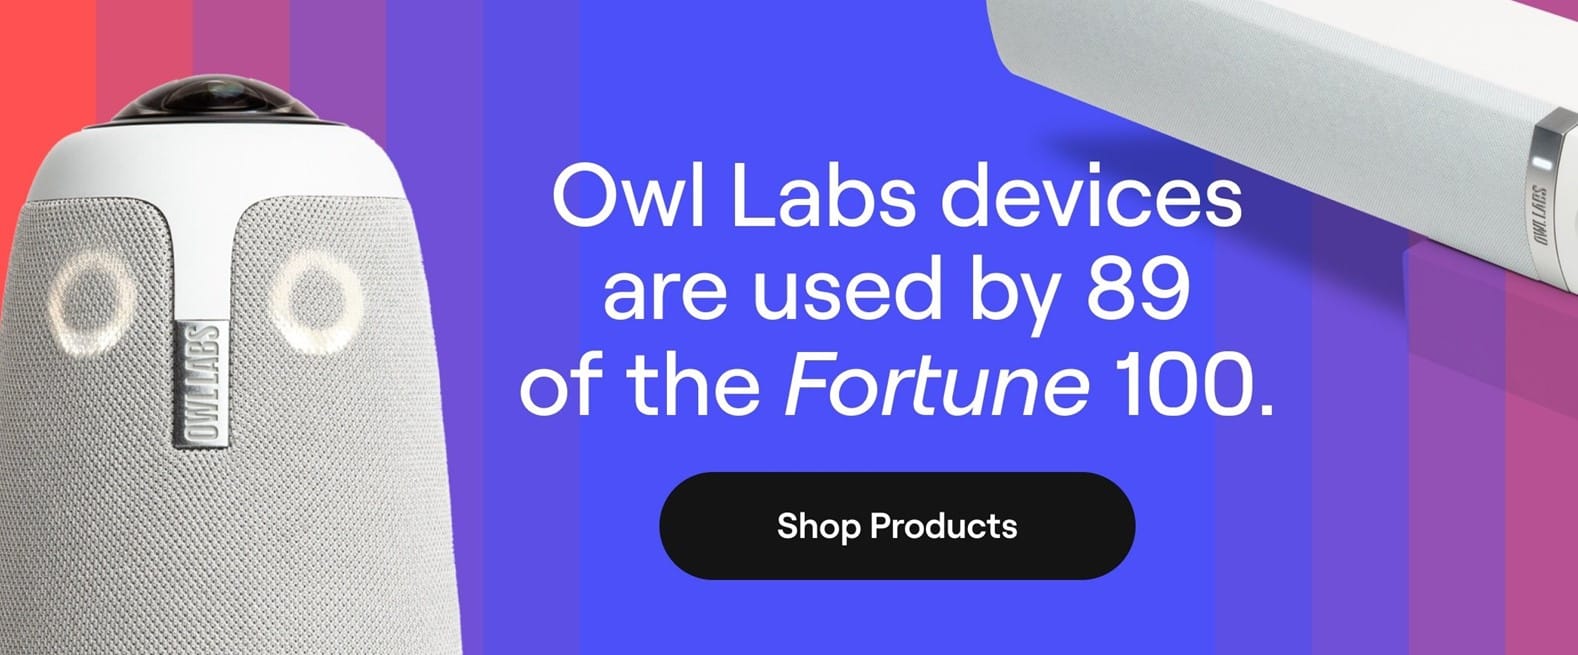 Owl Labs Fortune 100